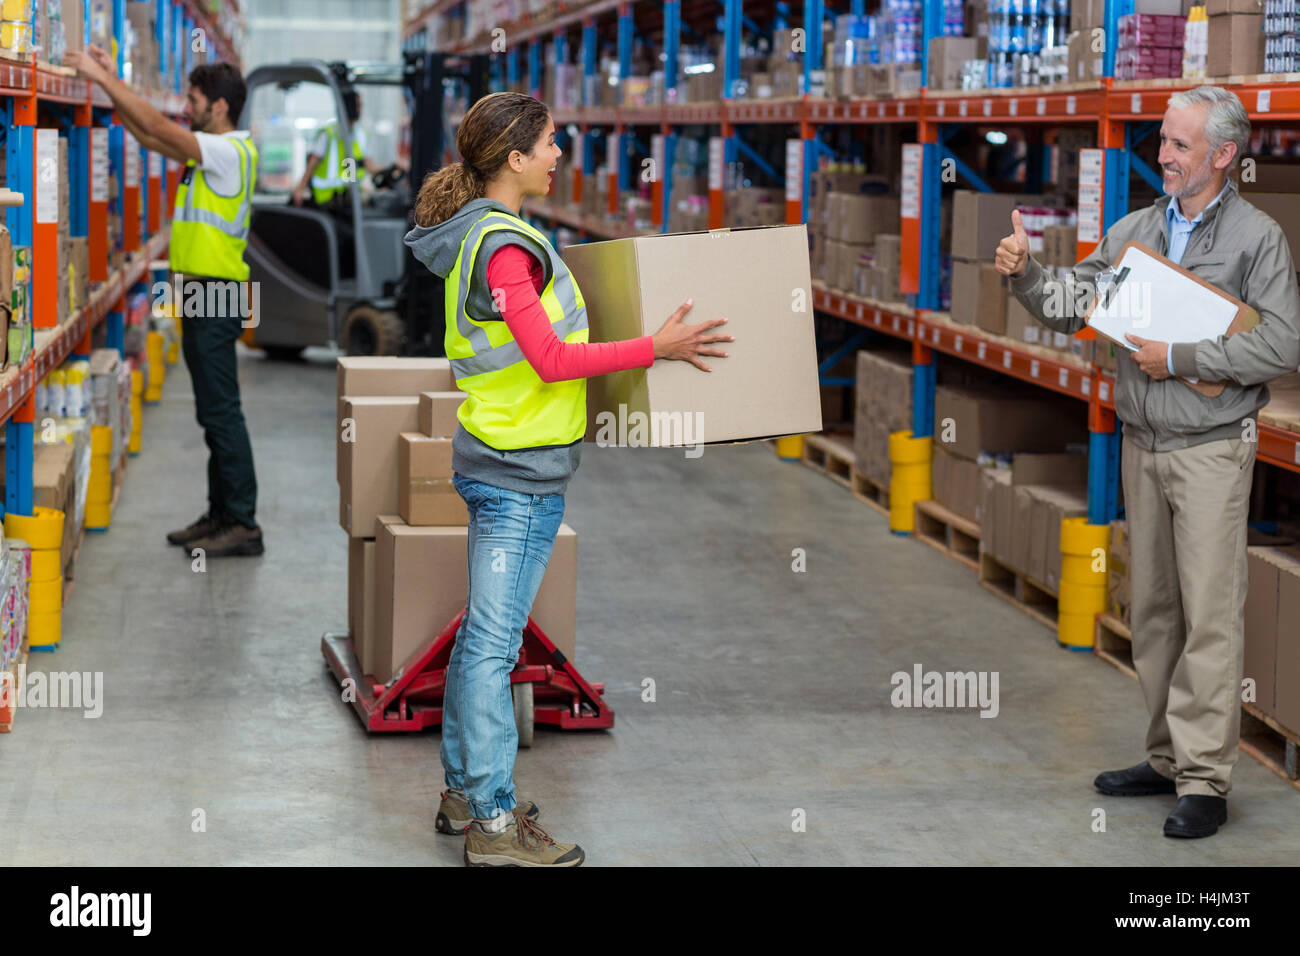 Warehouse manager showing thumbs up to female worker while carrying cardboard boxes Stock Photo